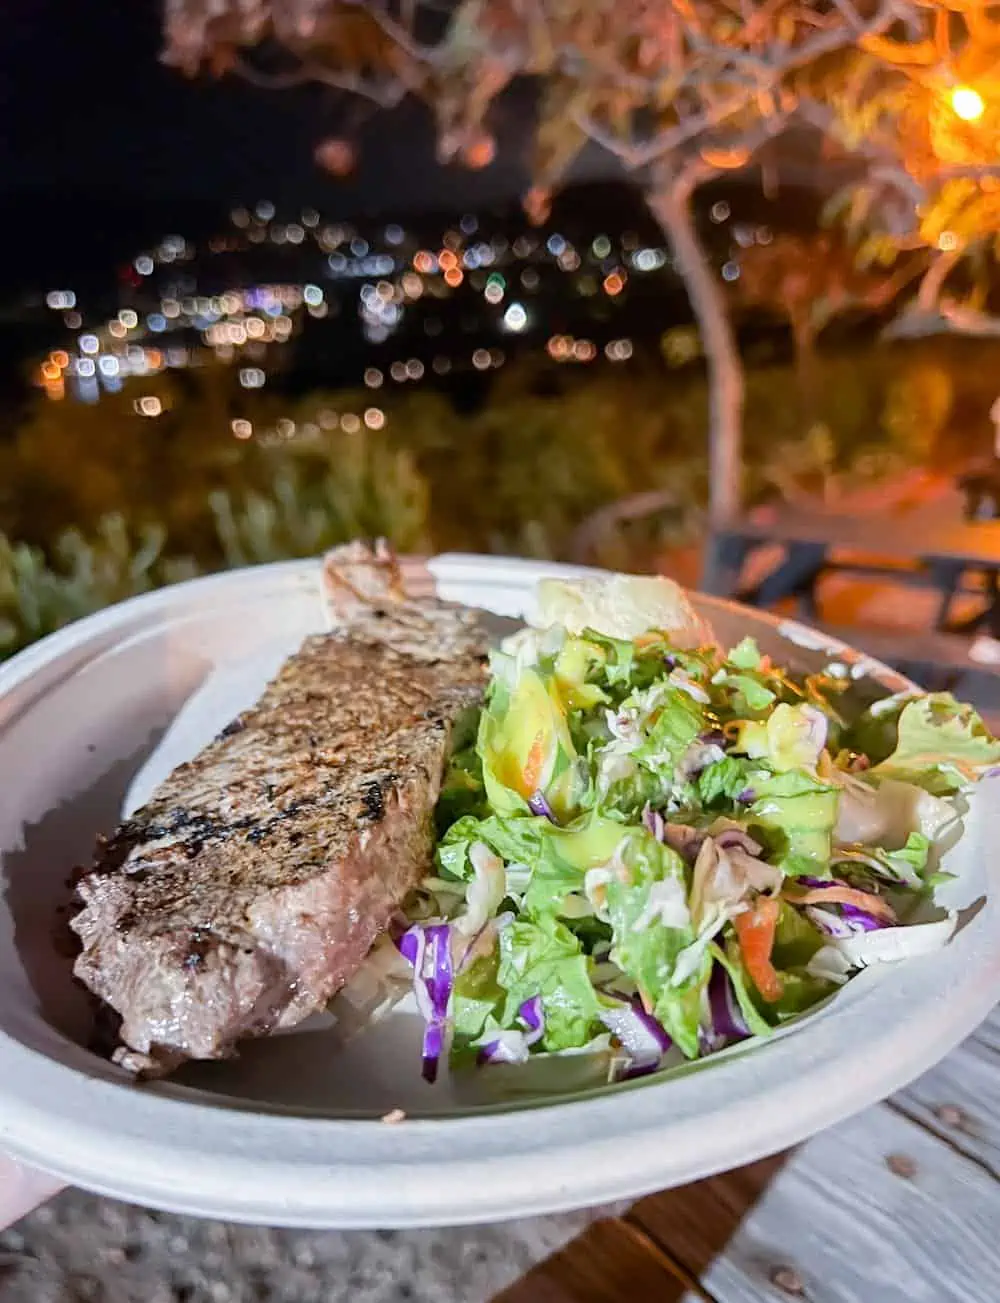 Grilled tuna on the menu at Shirley Heights.